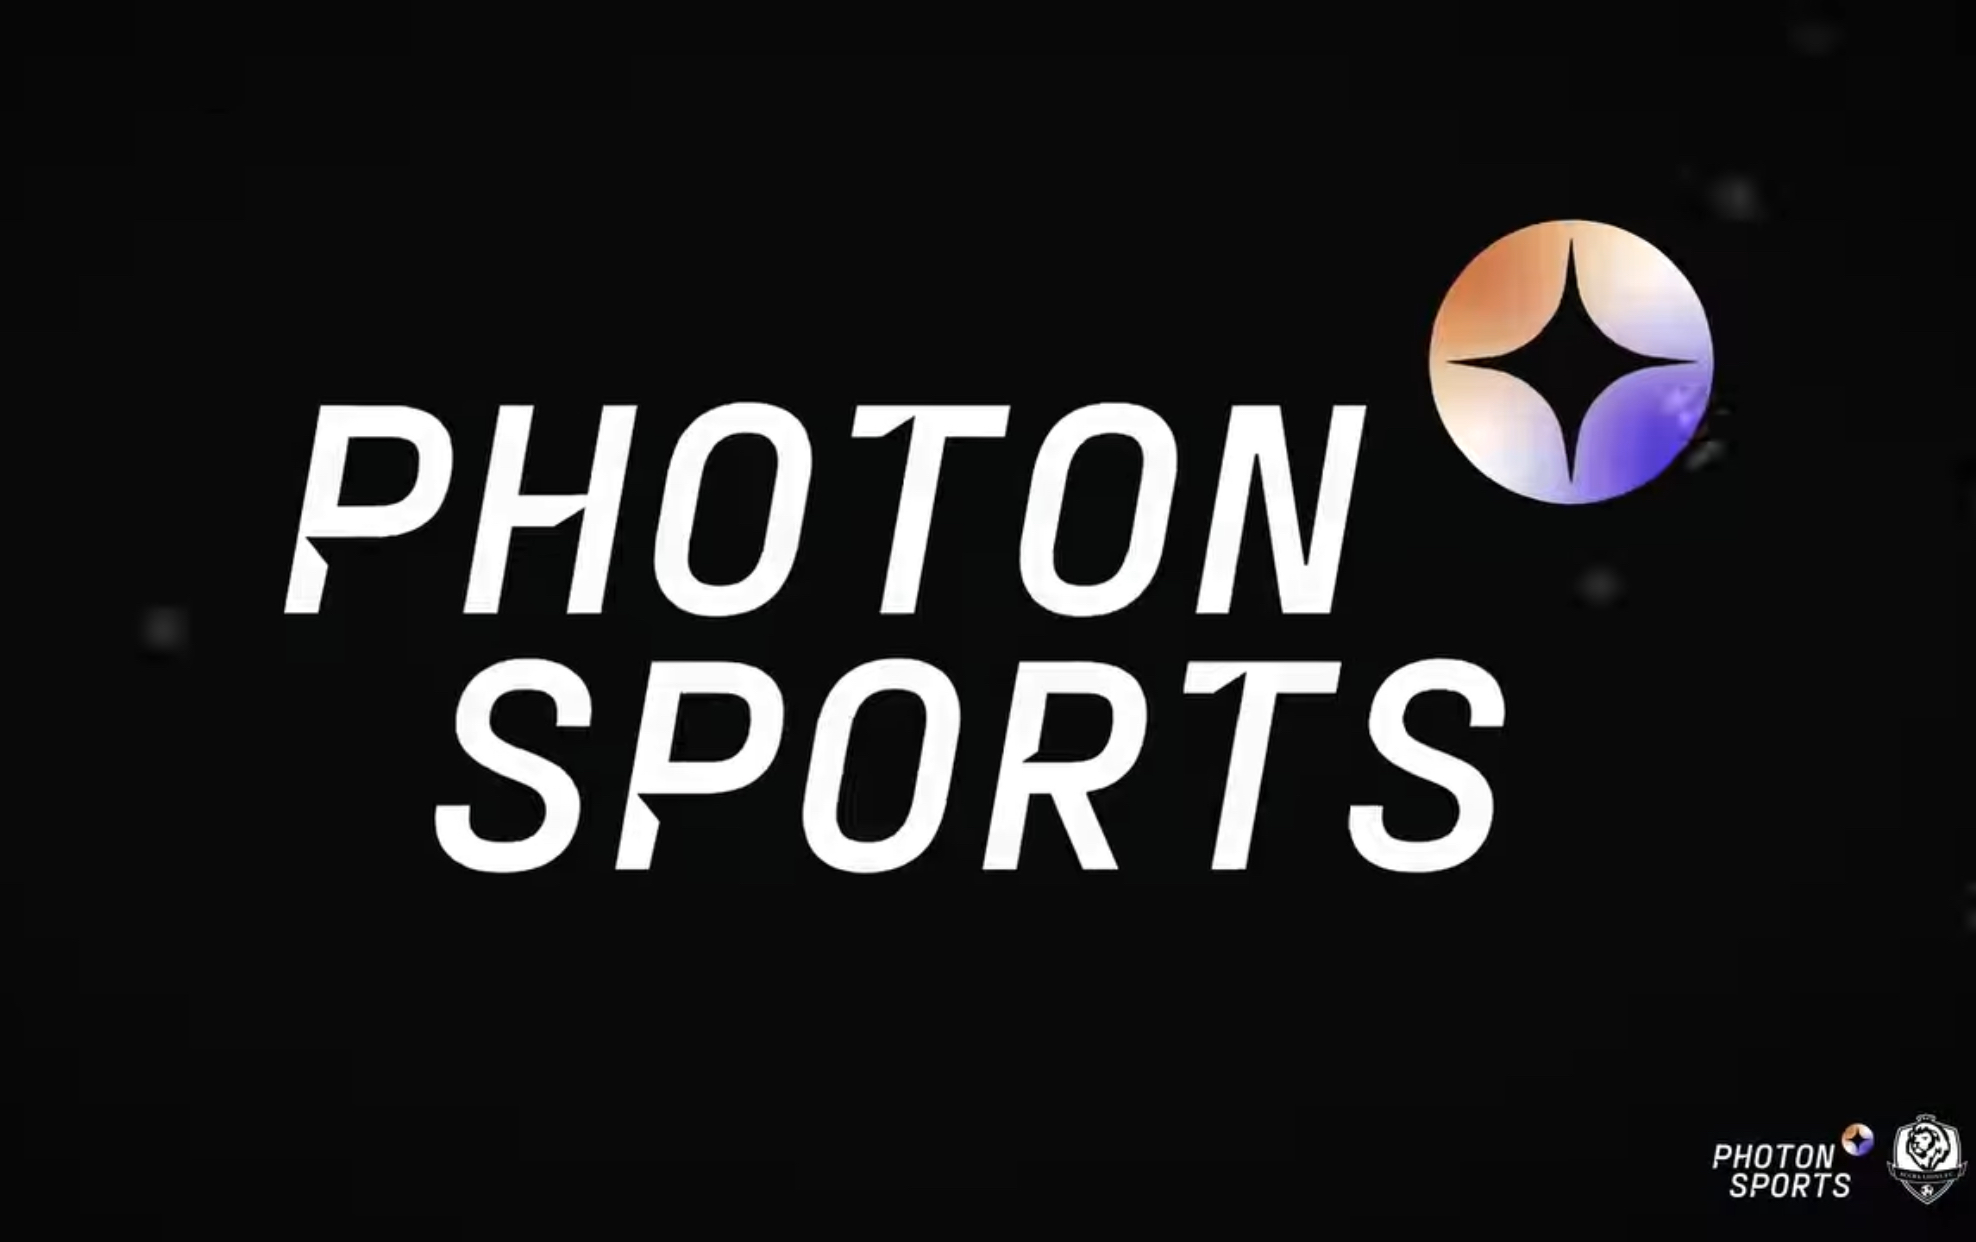 Accra Lions sign revolutionary partnership with Photon Sports Tech